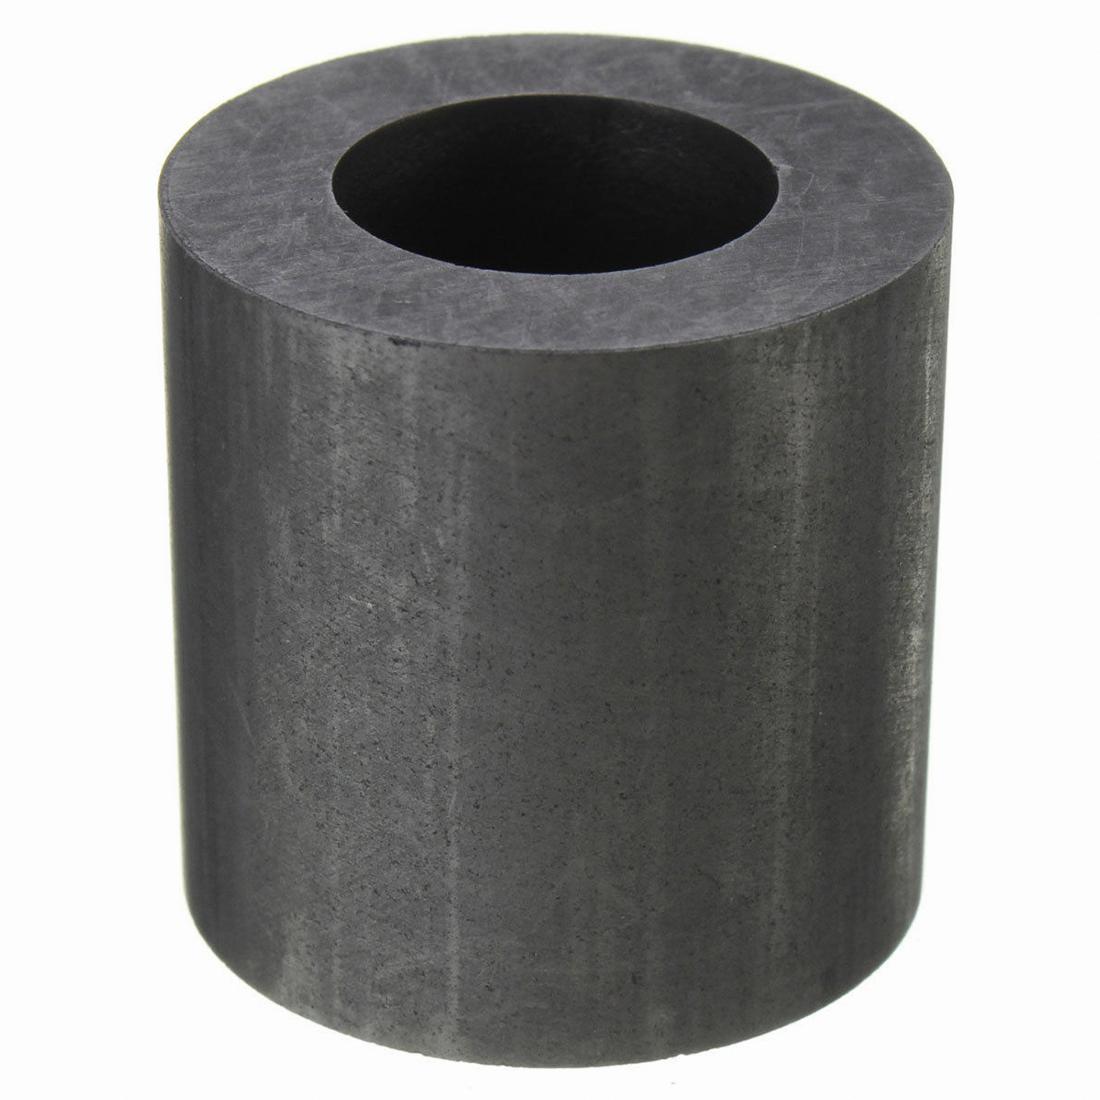 is graphite a metal